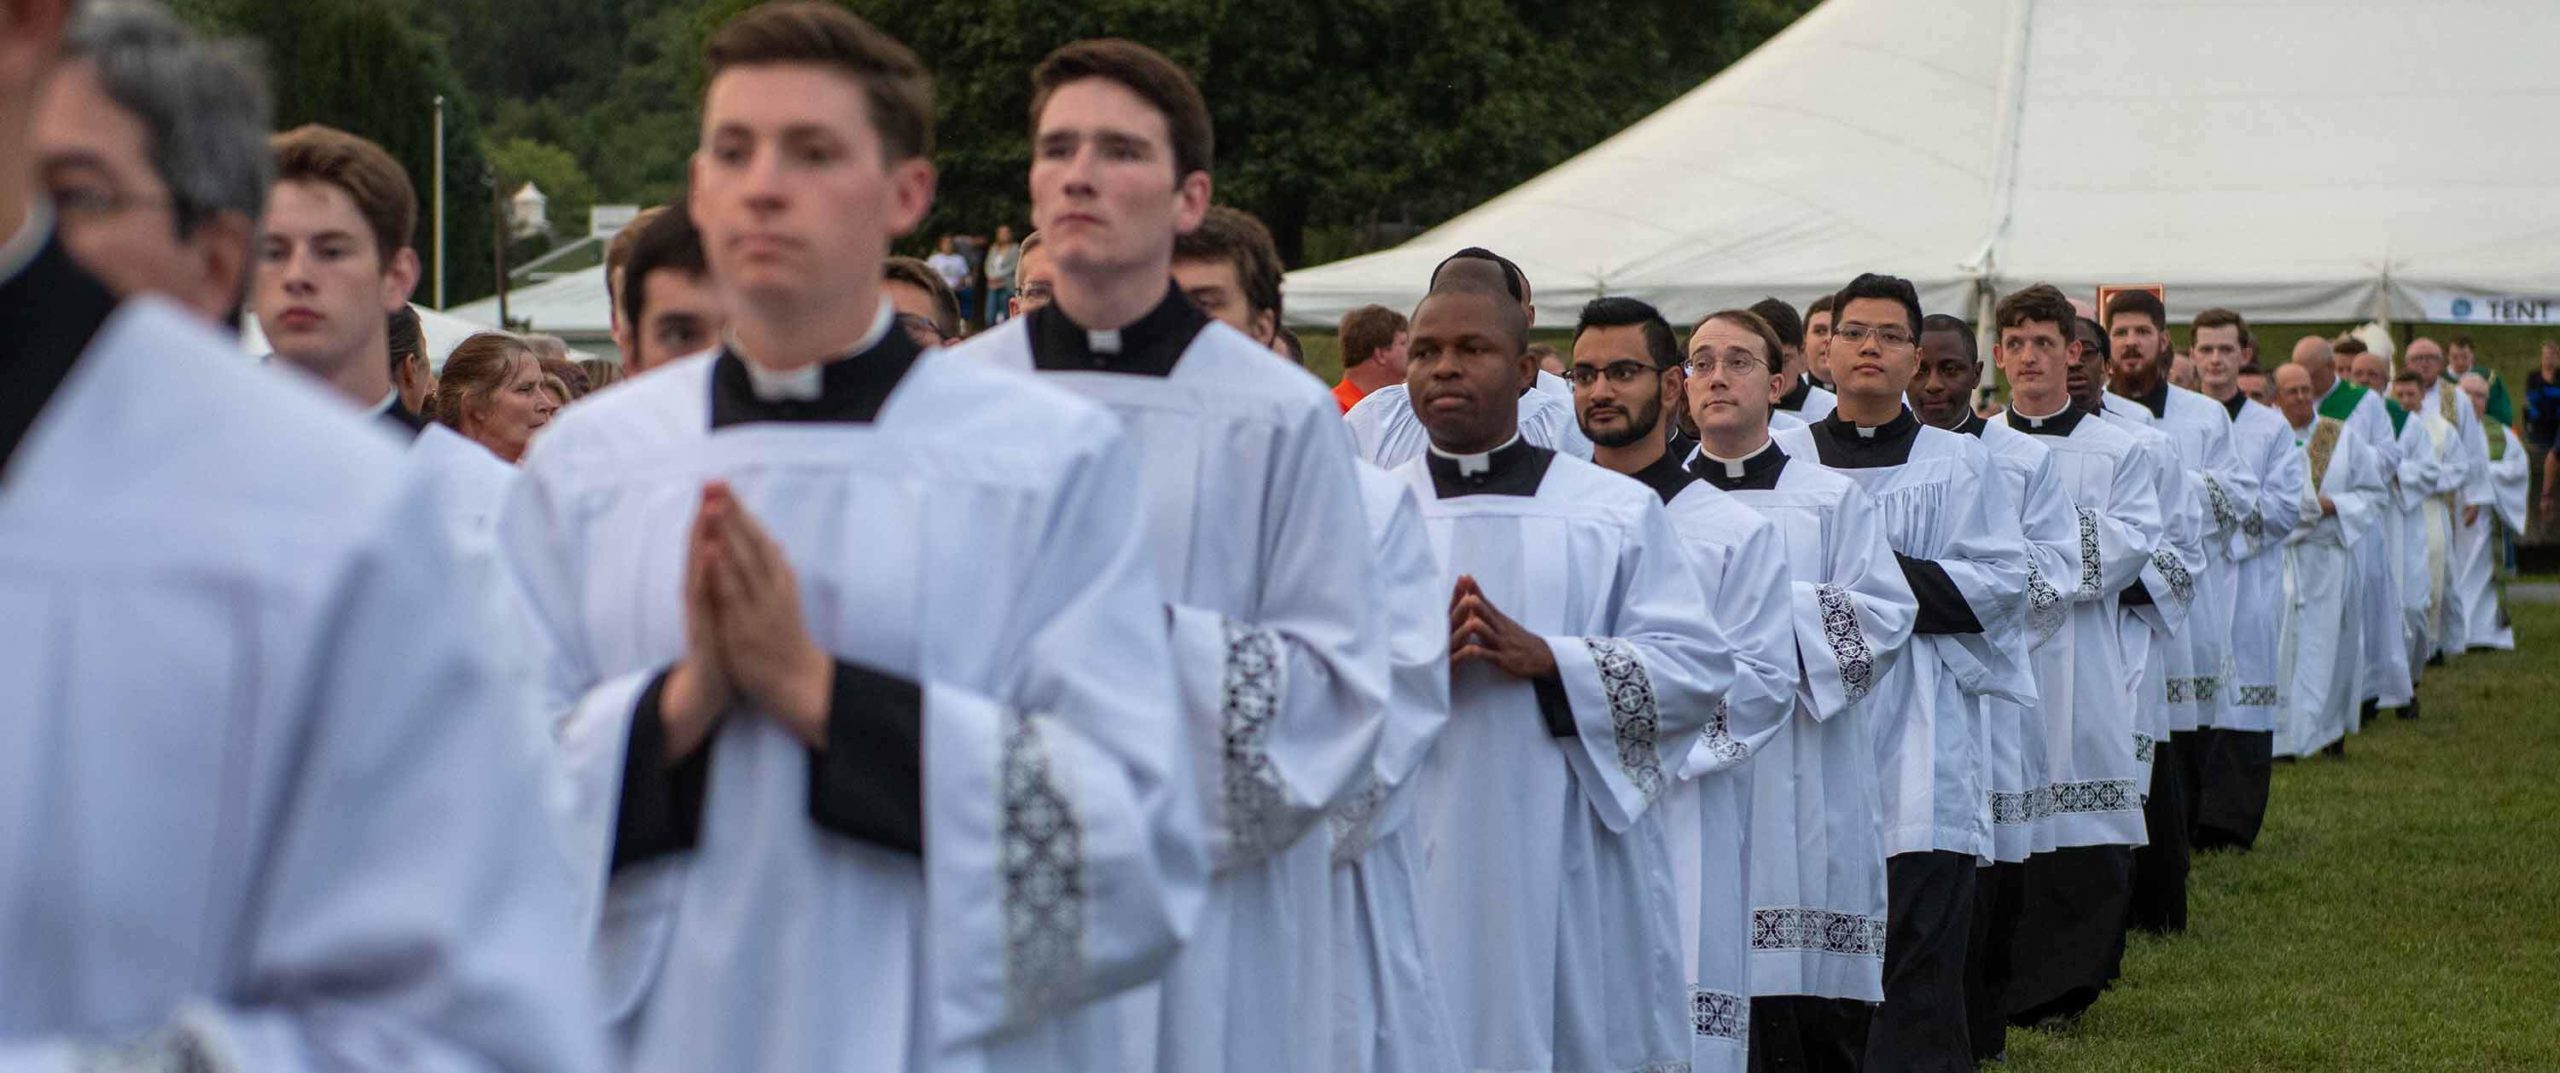 Archdiocese 17 new seminarians, largest group in at least 36